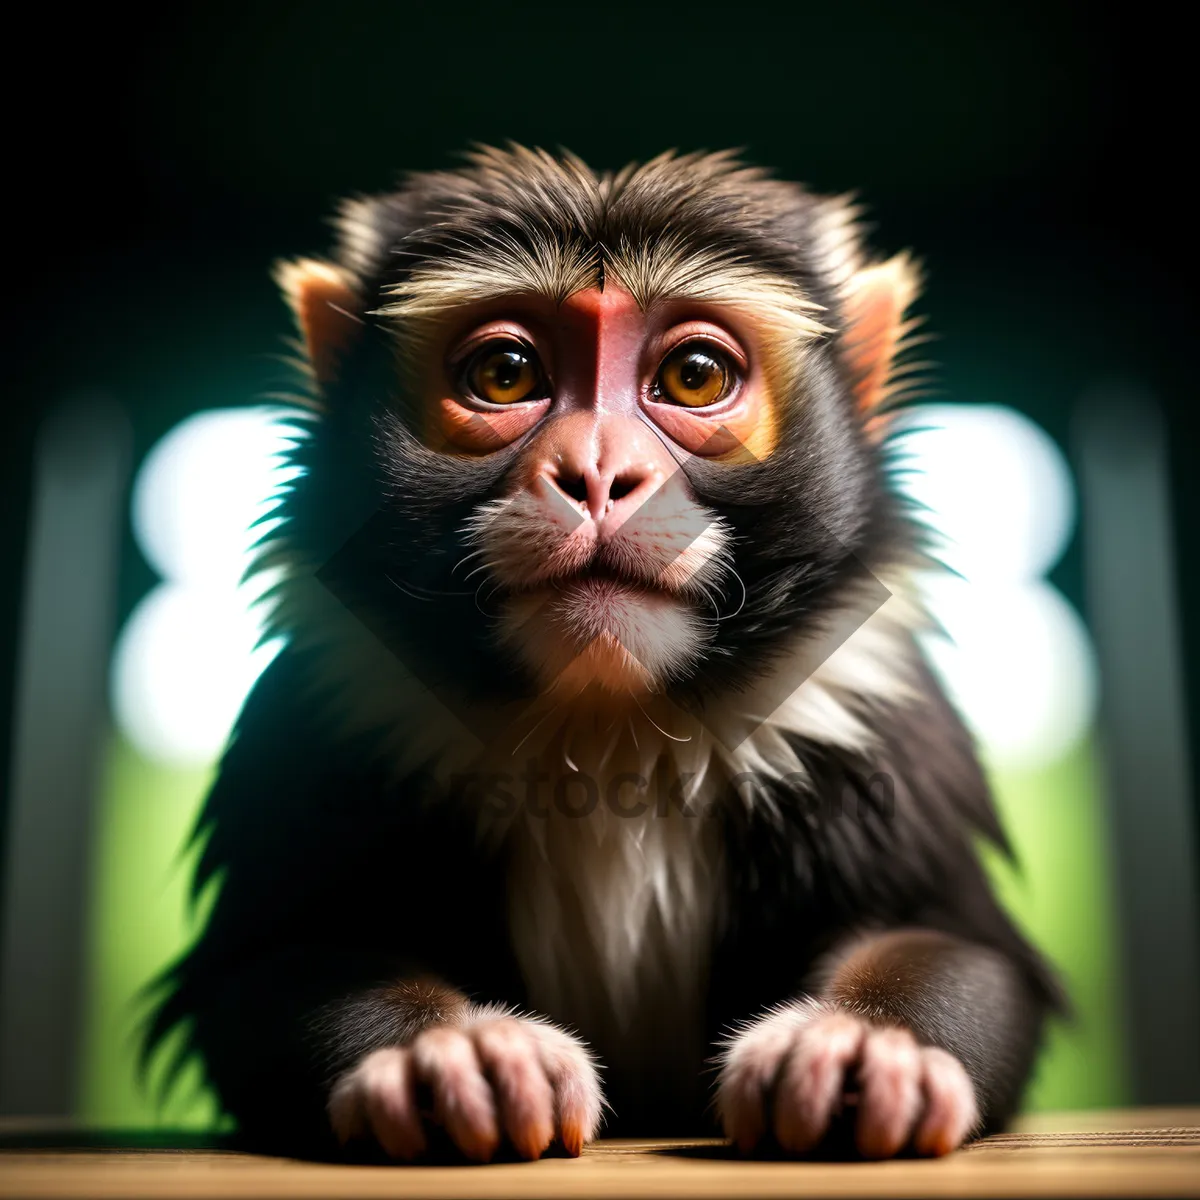 Picture of Adorable primate with eyes that convey a range of emotions, capturing hearts with its irresistible charm